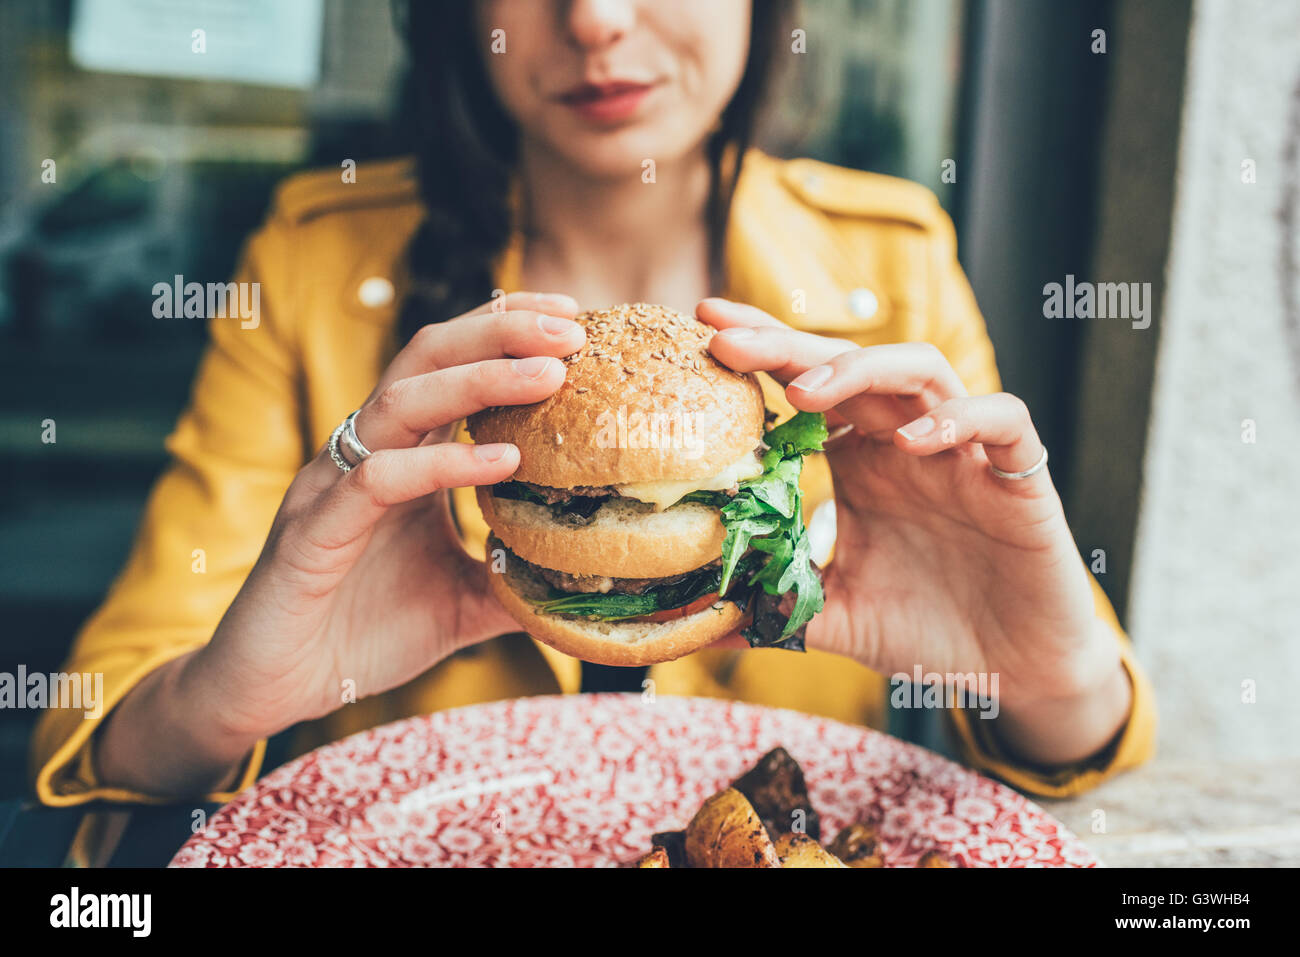 Close up on the hands of a young woman sitting holding an hamburger - hunger, food, meal concept Stock Photo